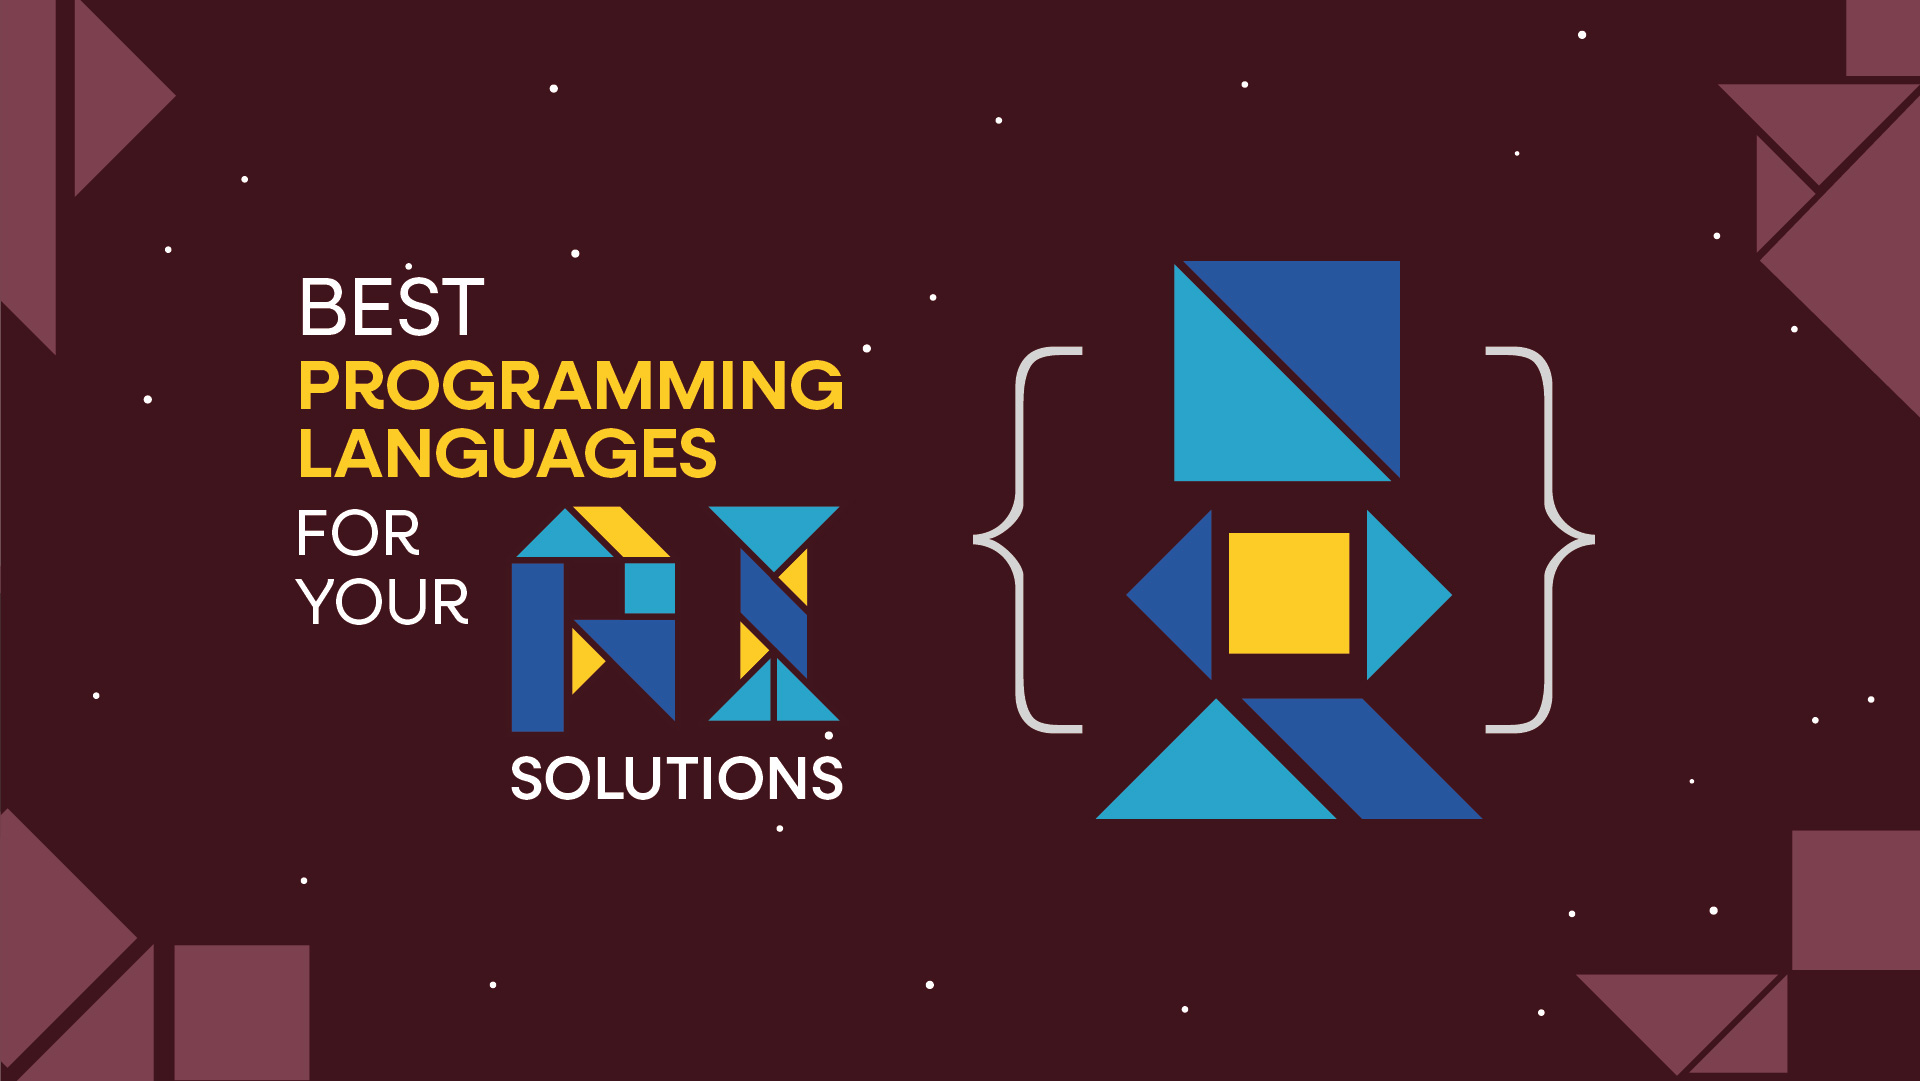 What are the Best Programming Languages to Develop your AI Solution on?